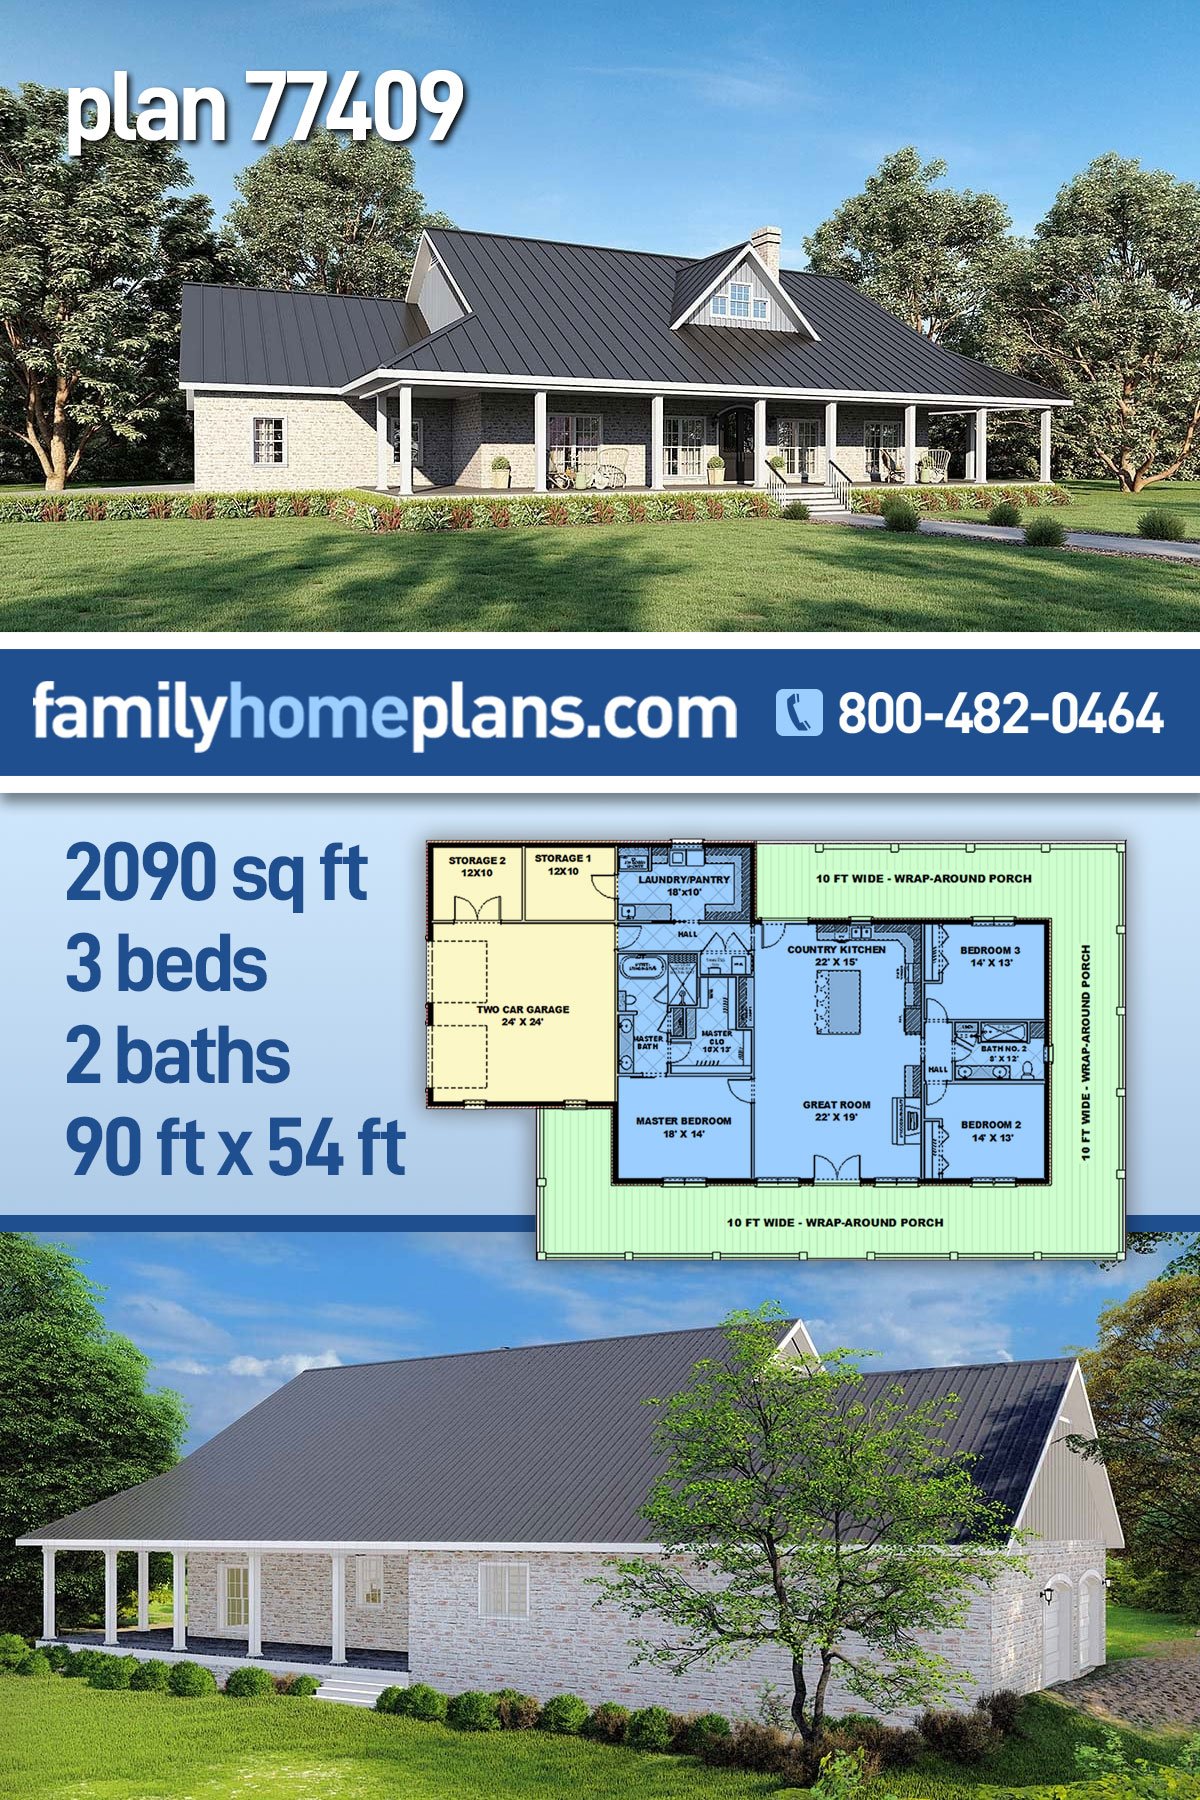 Country, Farmhouse, Ranch, Southern House Plan 77409 with 3 Beds, 2 Baths, 2 Car Garage